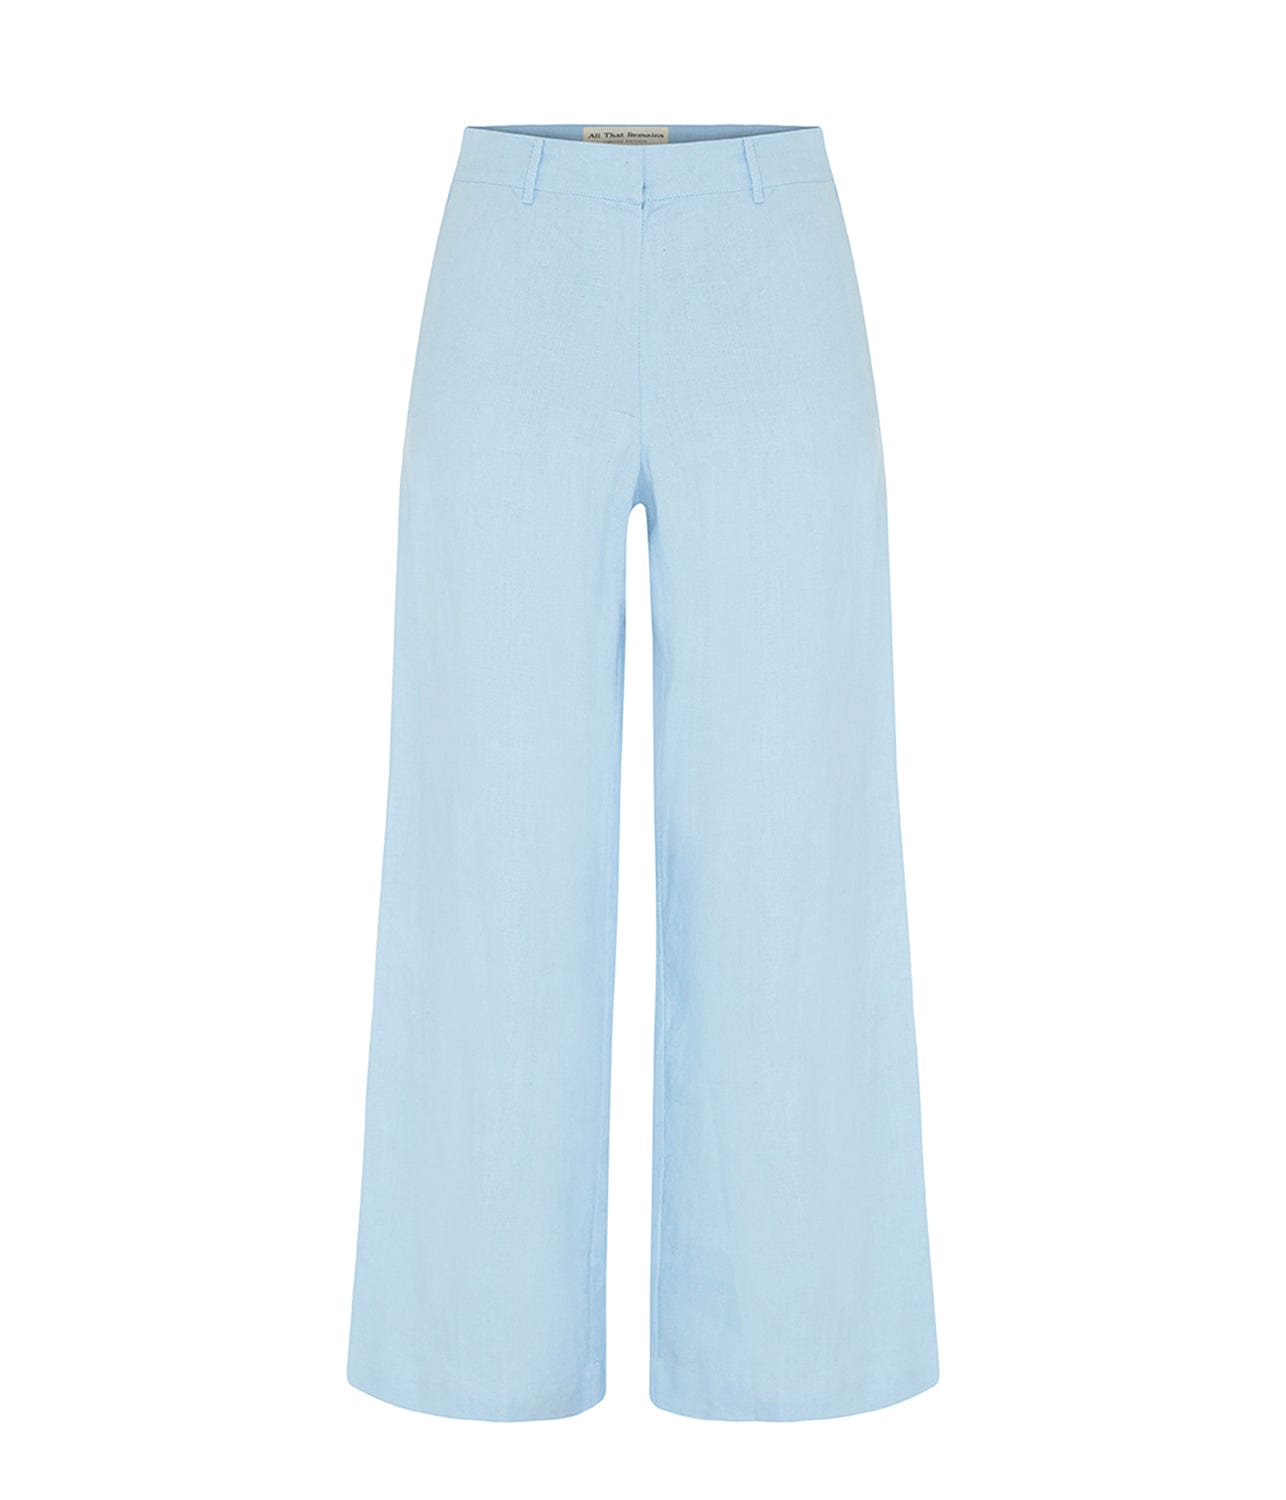 LOUISE PANTS- SKY BLUE | ALL THAT REMAINS |  ALL THAT REMAINS LOUISE PANTS- SKY BLUE